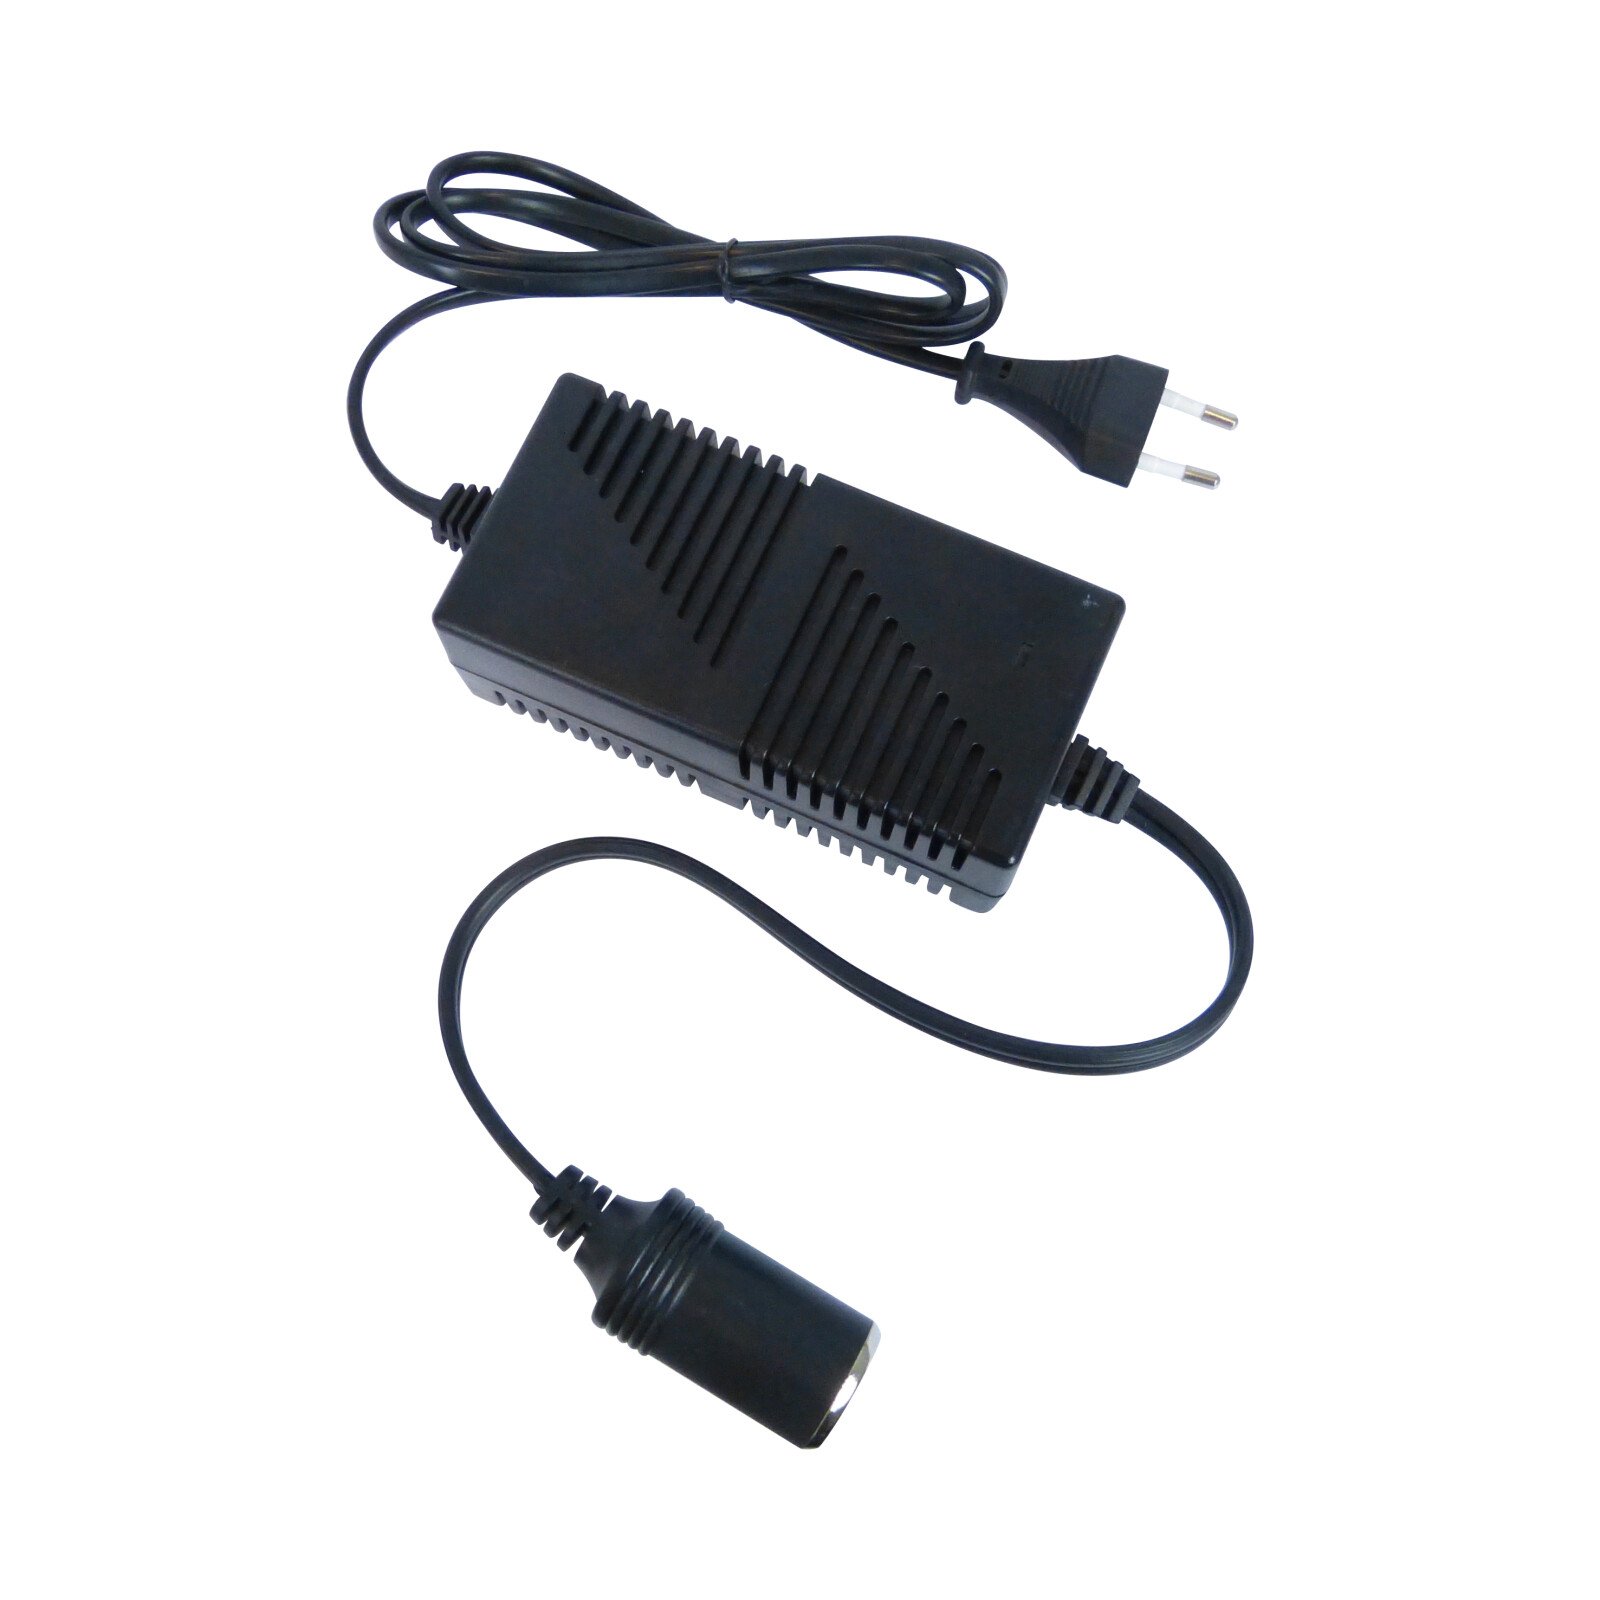 Carpoint transformer from 240V to 12V 60W max 5A thumb